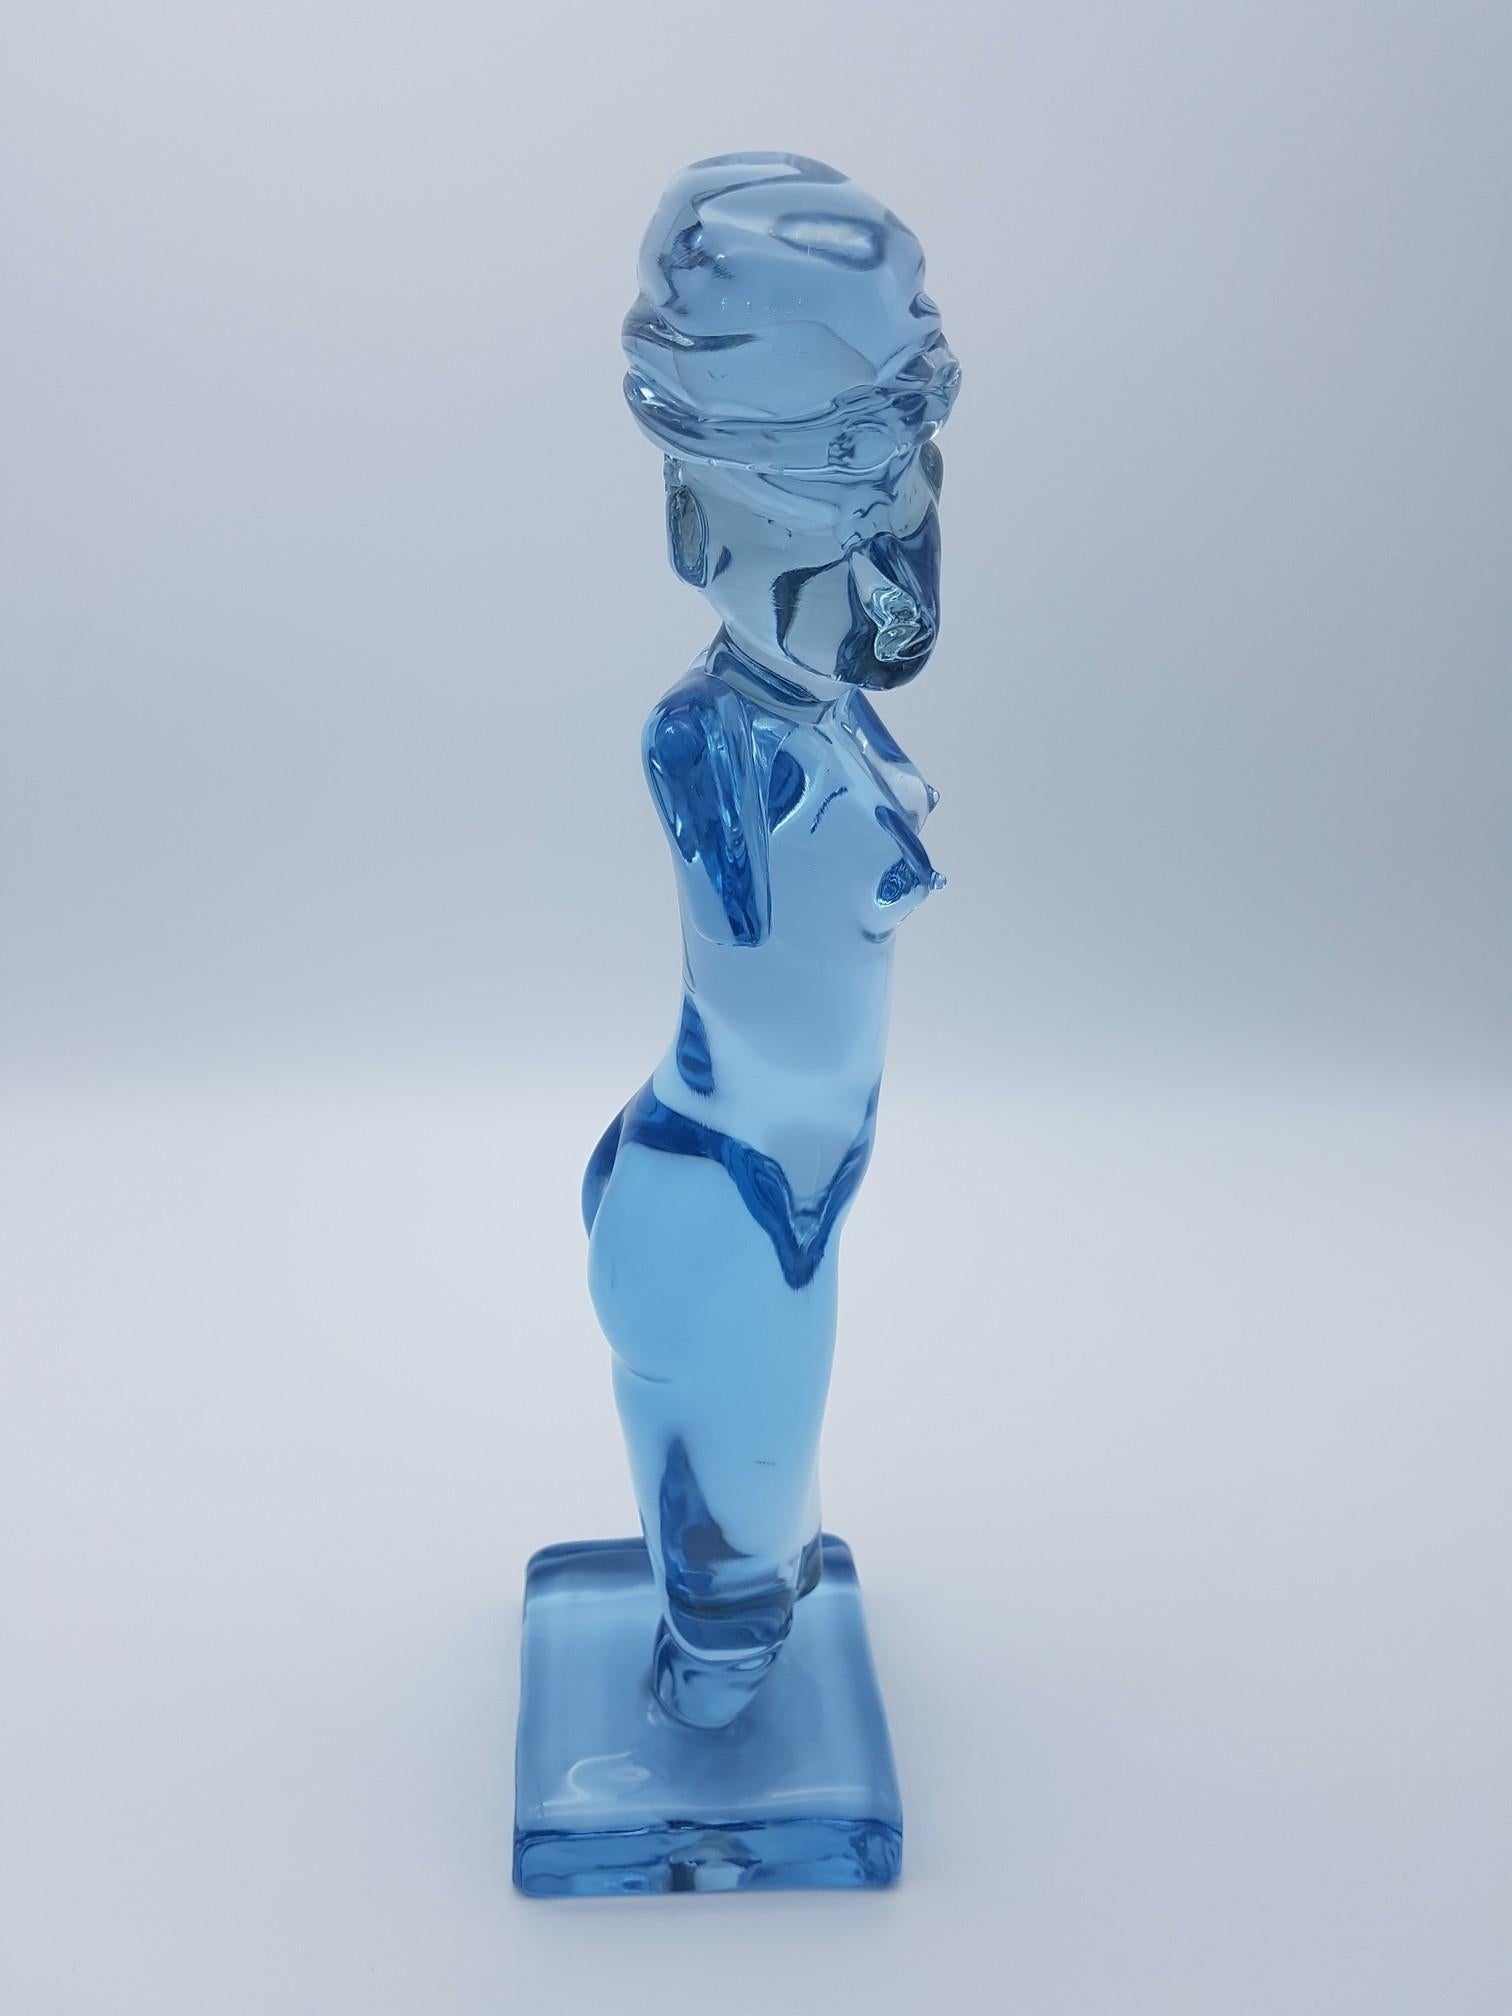 Modern Murano Glass Female Torso/Sculpture, Sky Blue Color by Cenedese For Sale 3